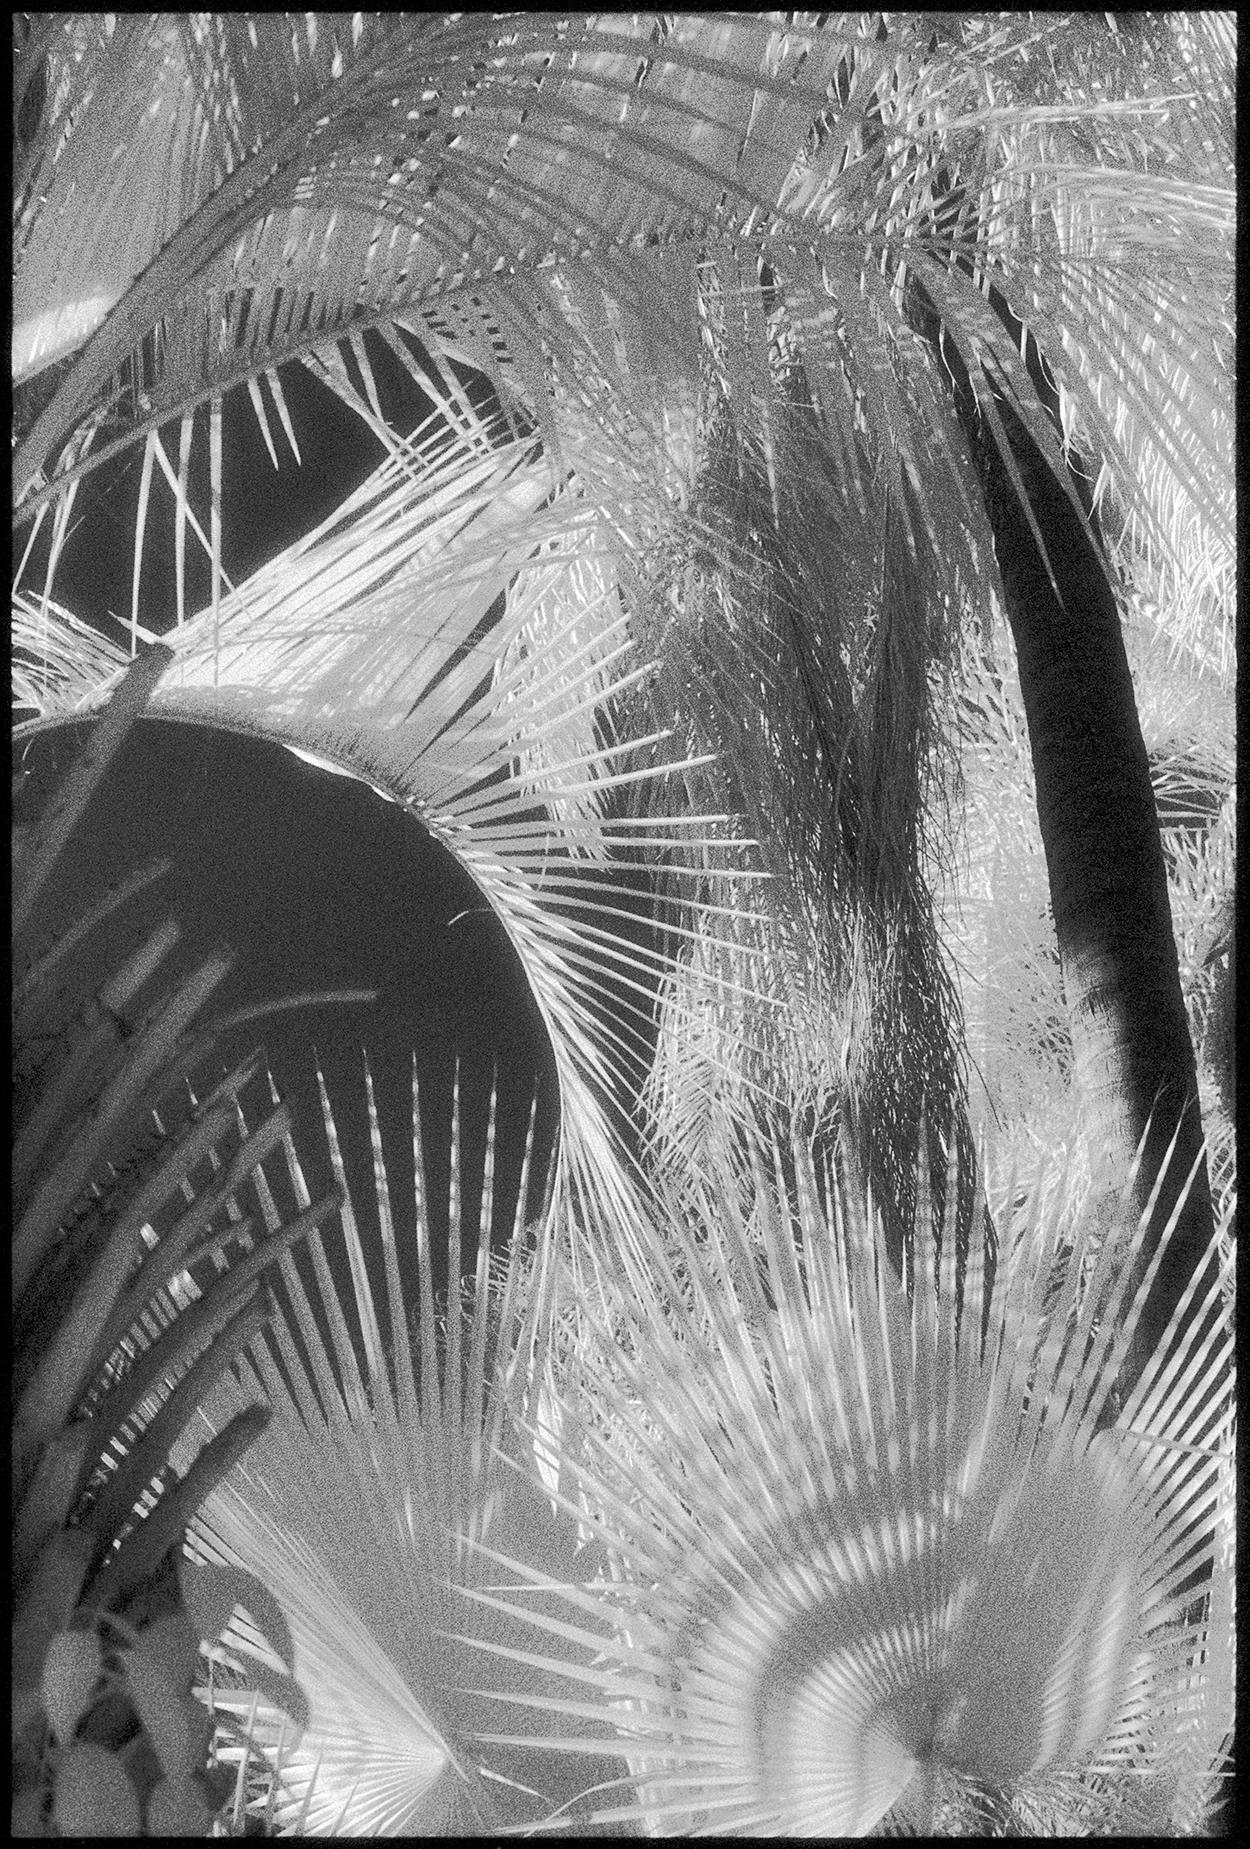 Edward Alfano Black and White Photograph - Huntington Gardens LII - Contemporary Photography of Palms and Plants (Black)